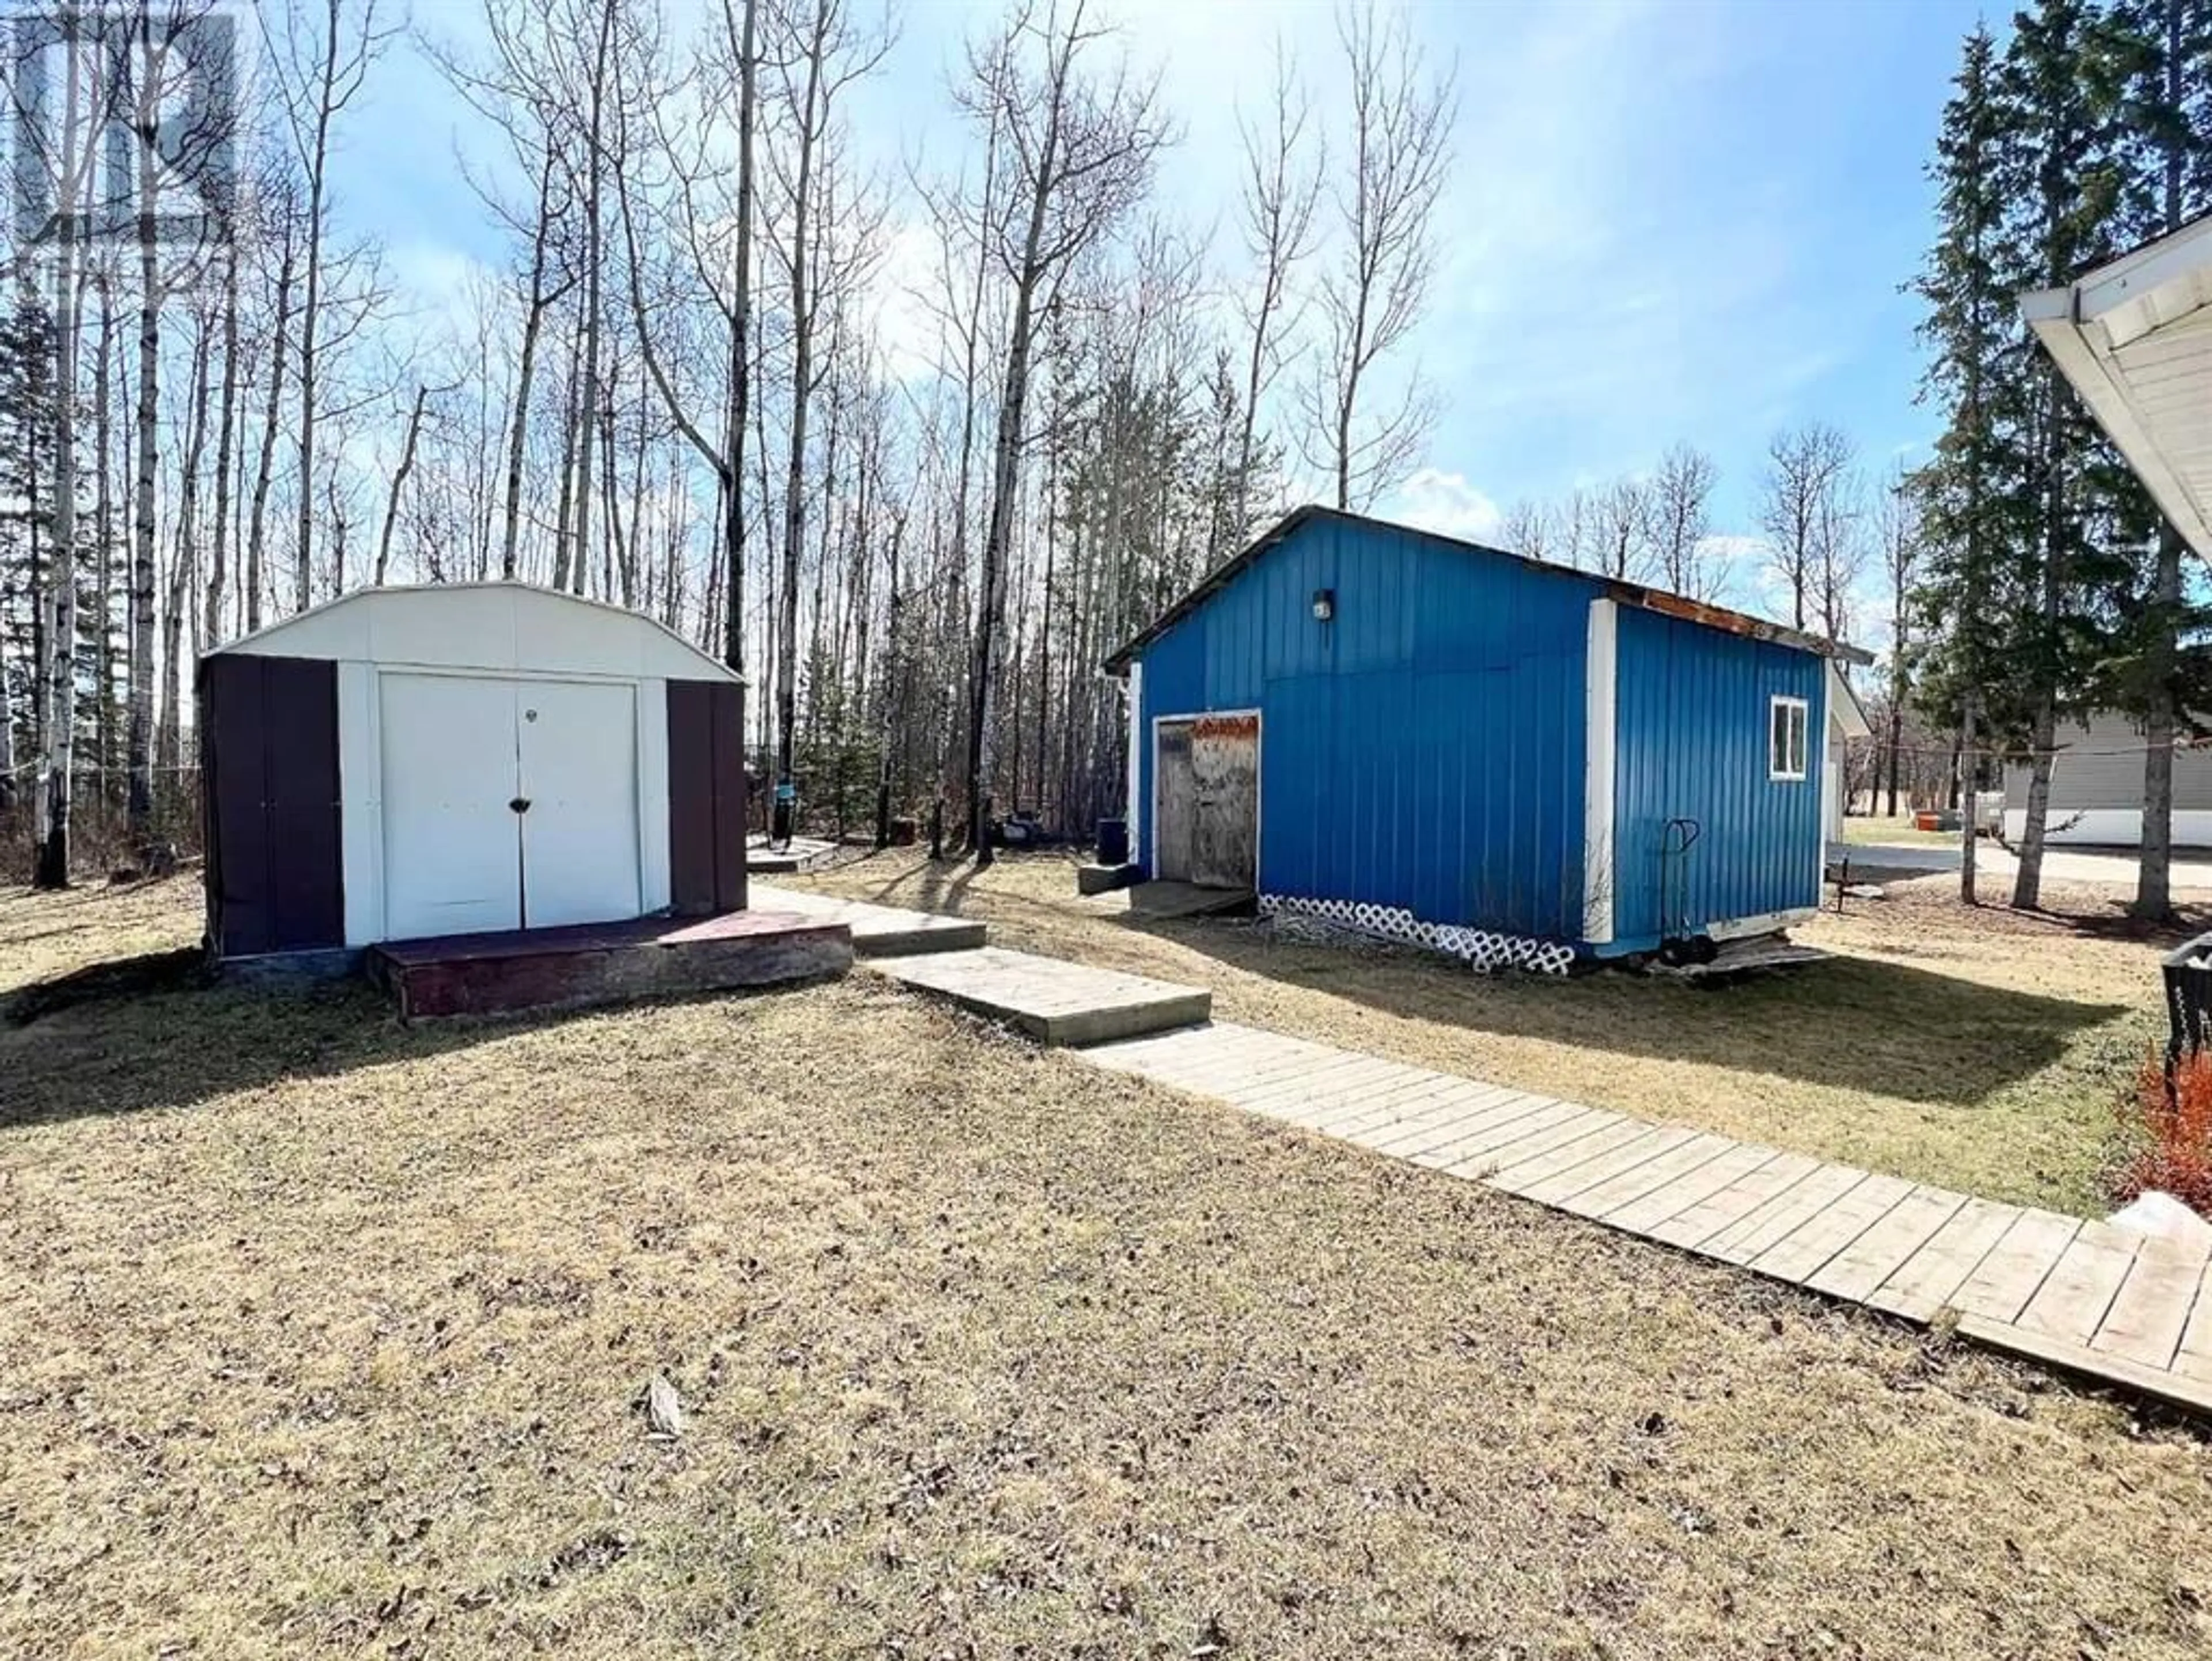 Shed for 13 660022 Range Road 225.5, Rural Athabasca County Alberta T9S2B7